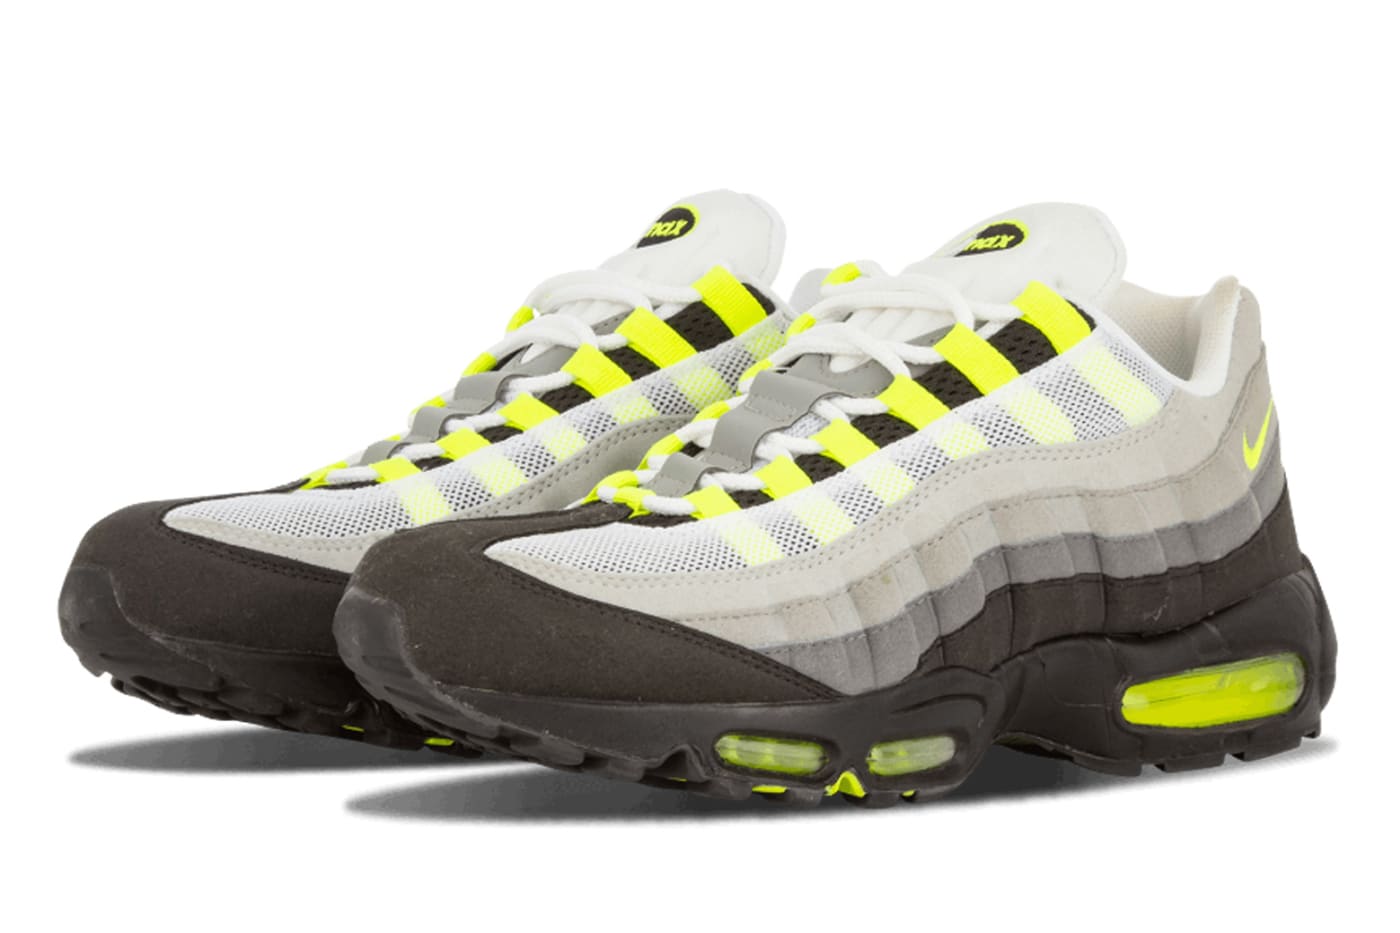 what year did air max 95 come out